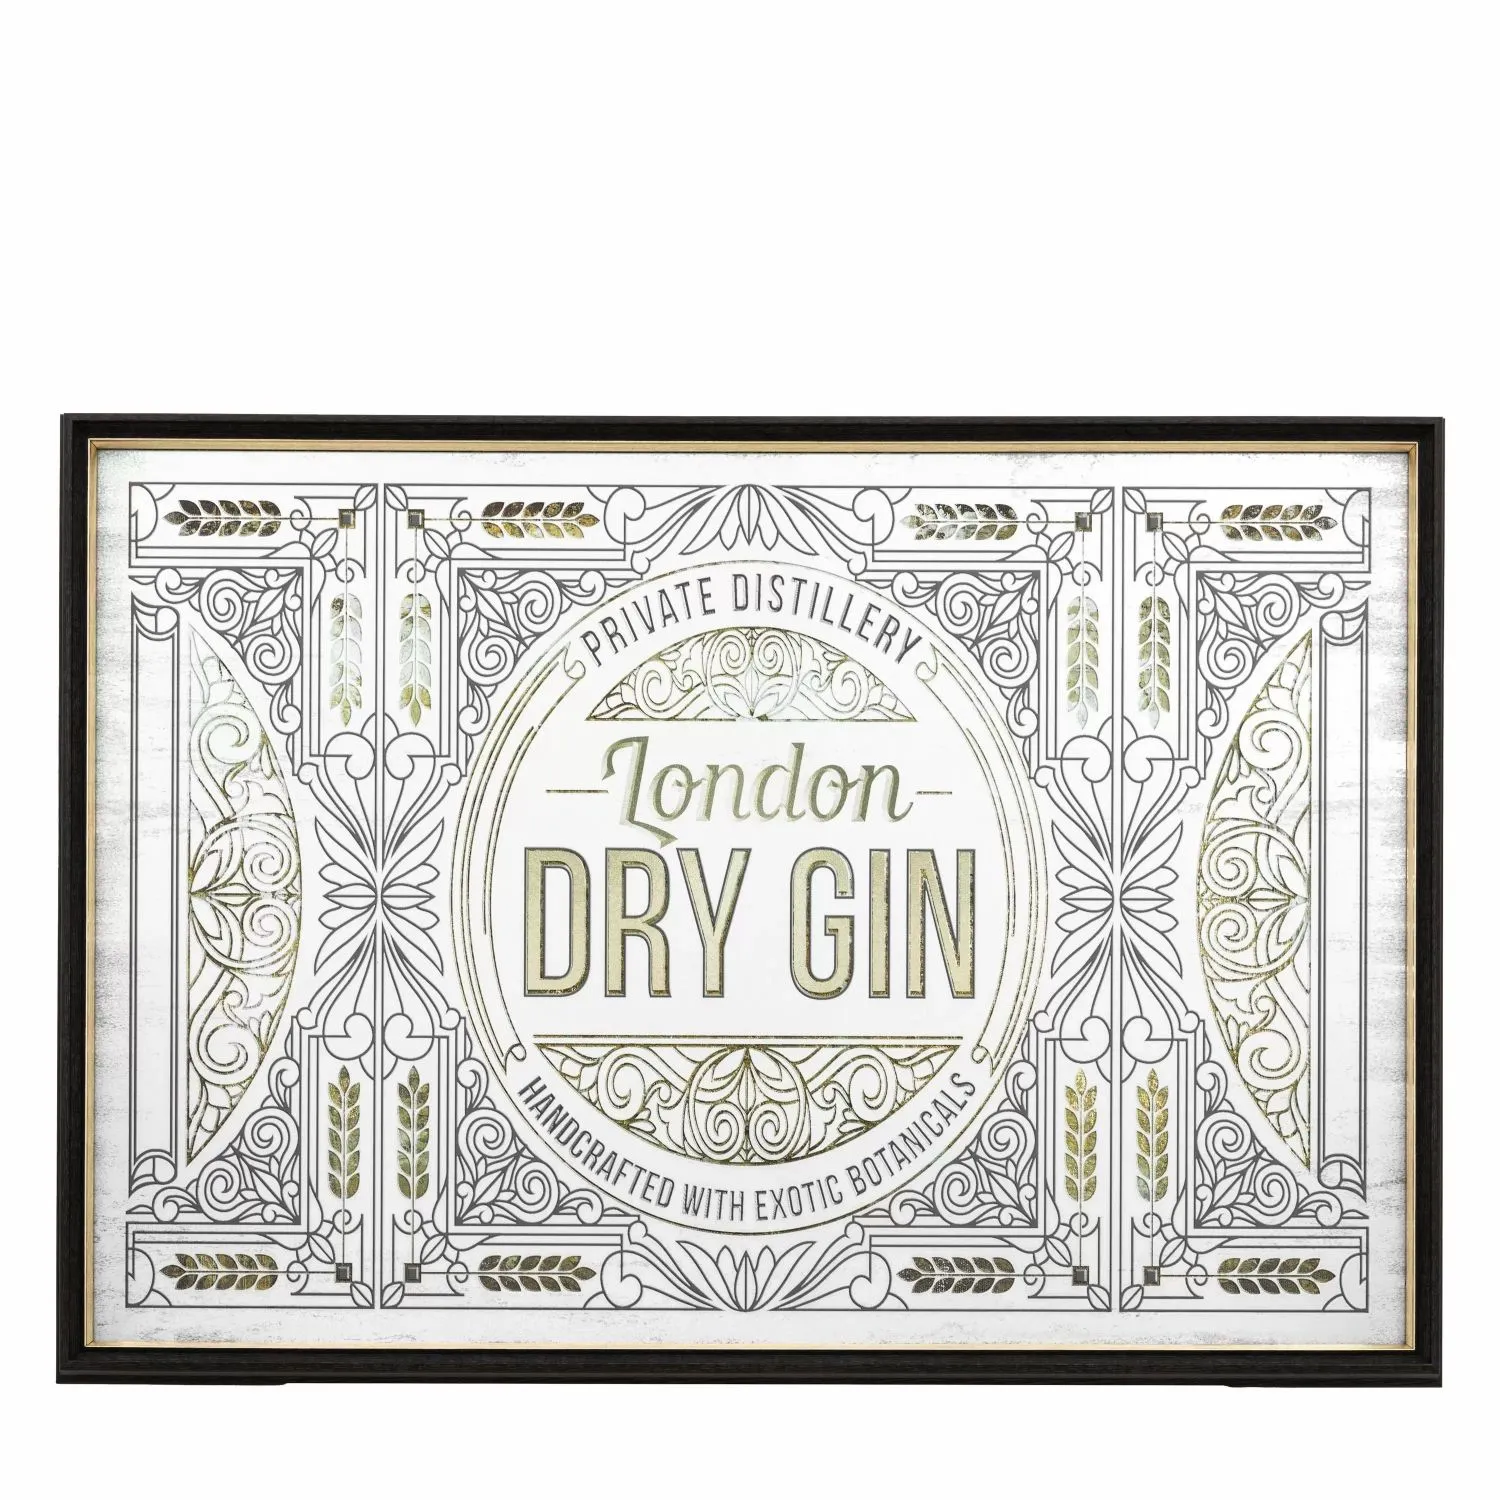 Dry Gin Mirror